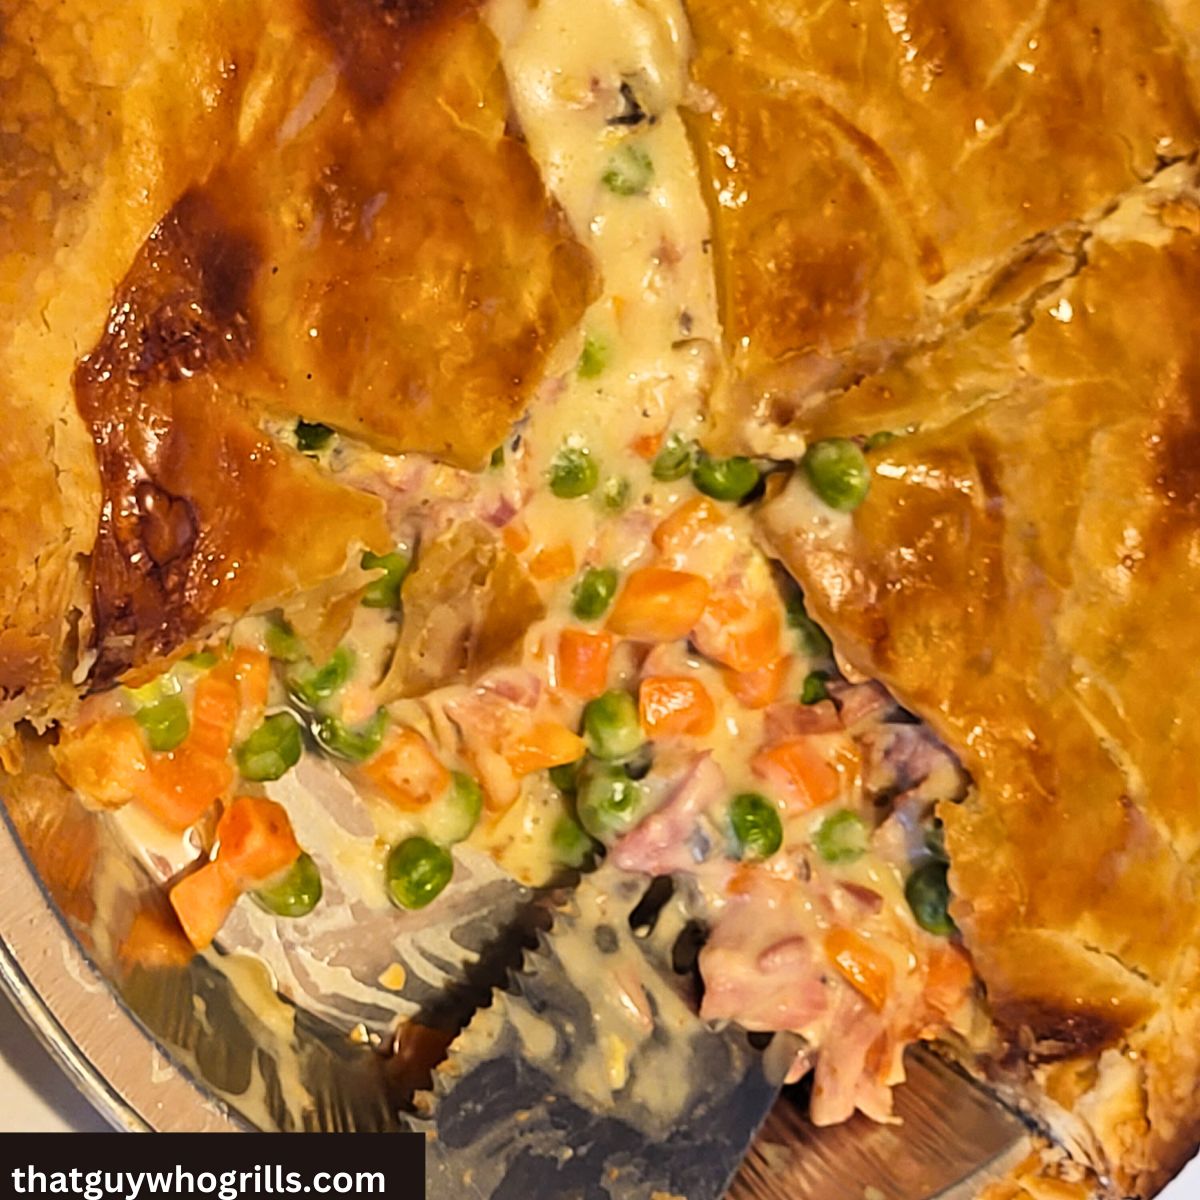 Smoked Pot Pie With Slices Missing from it